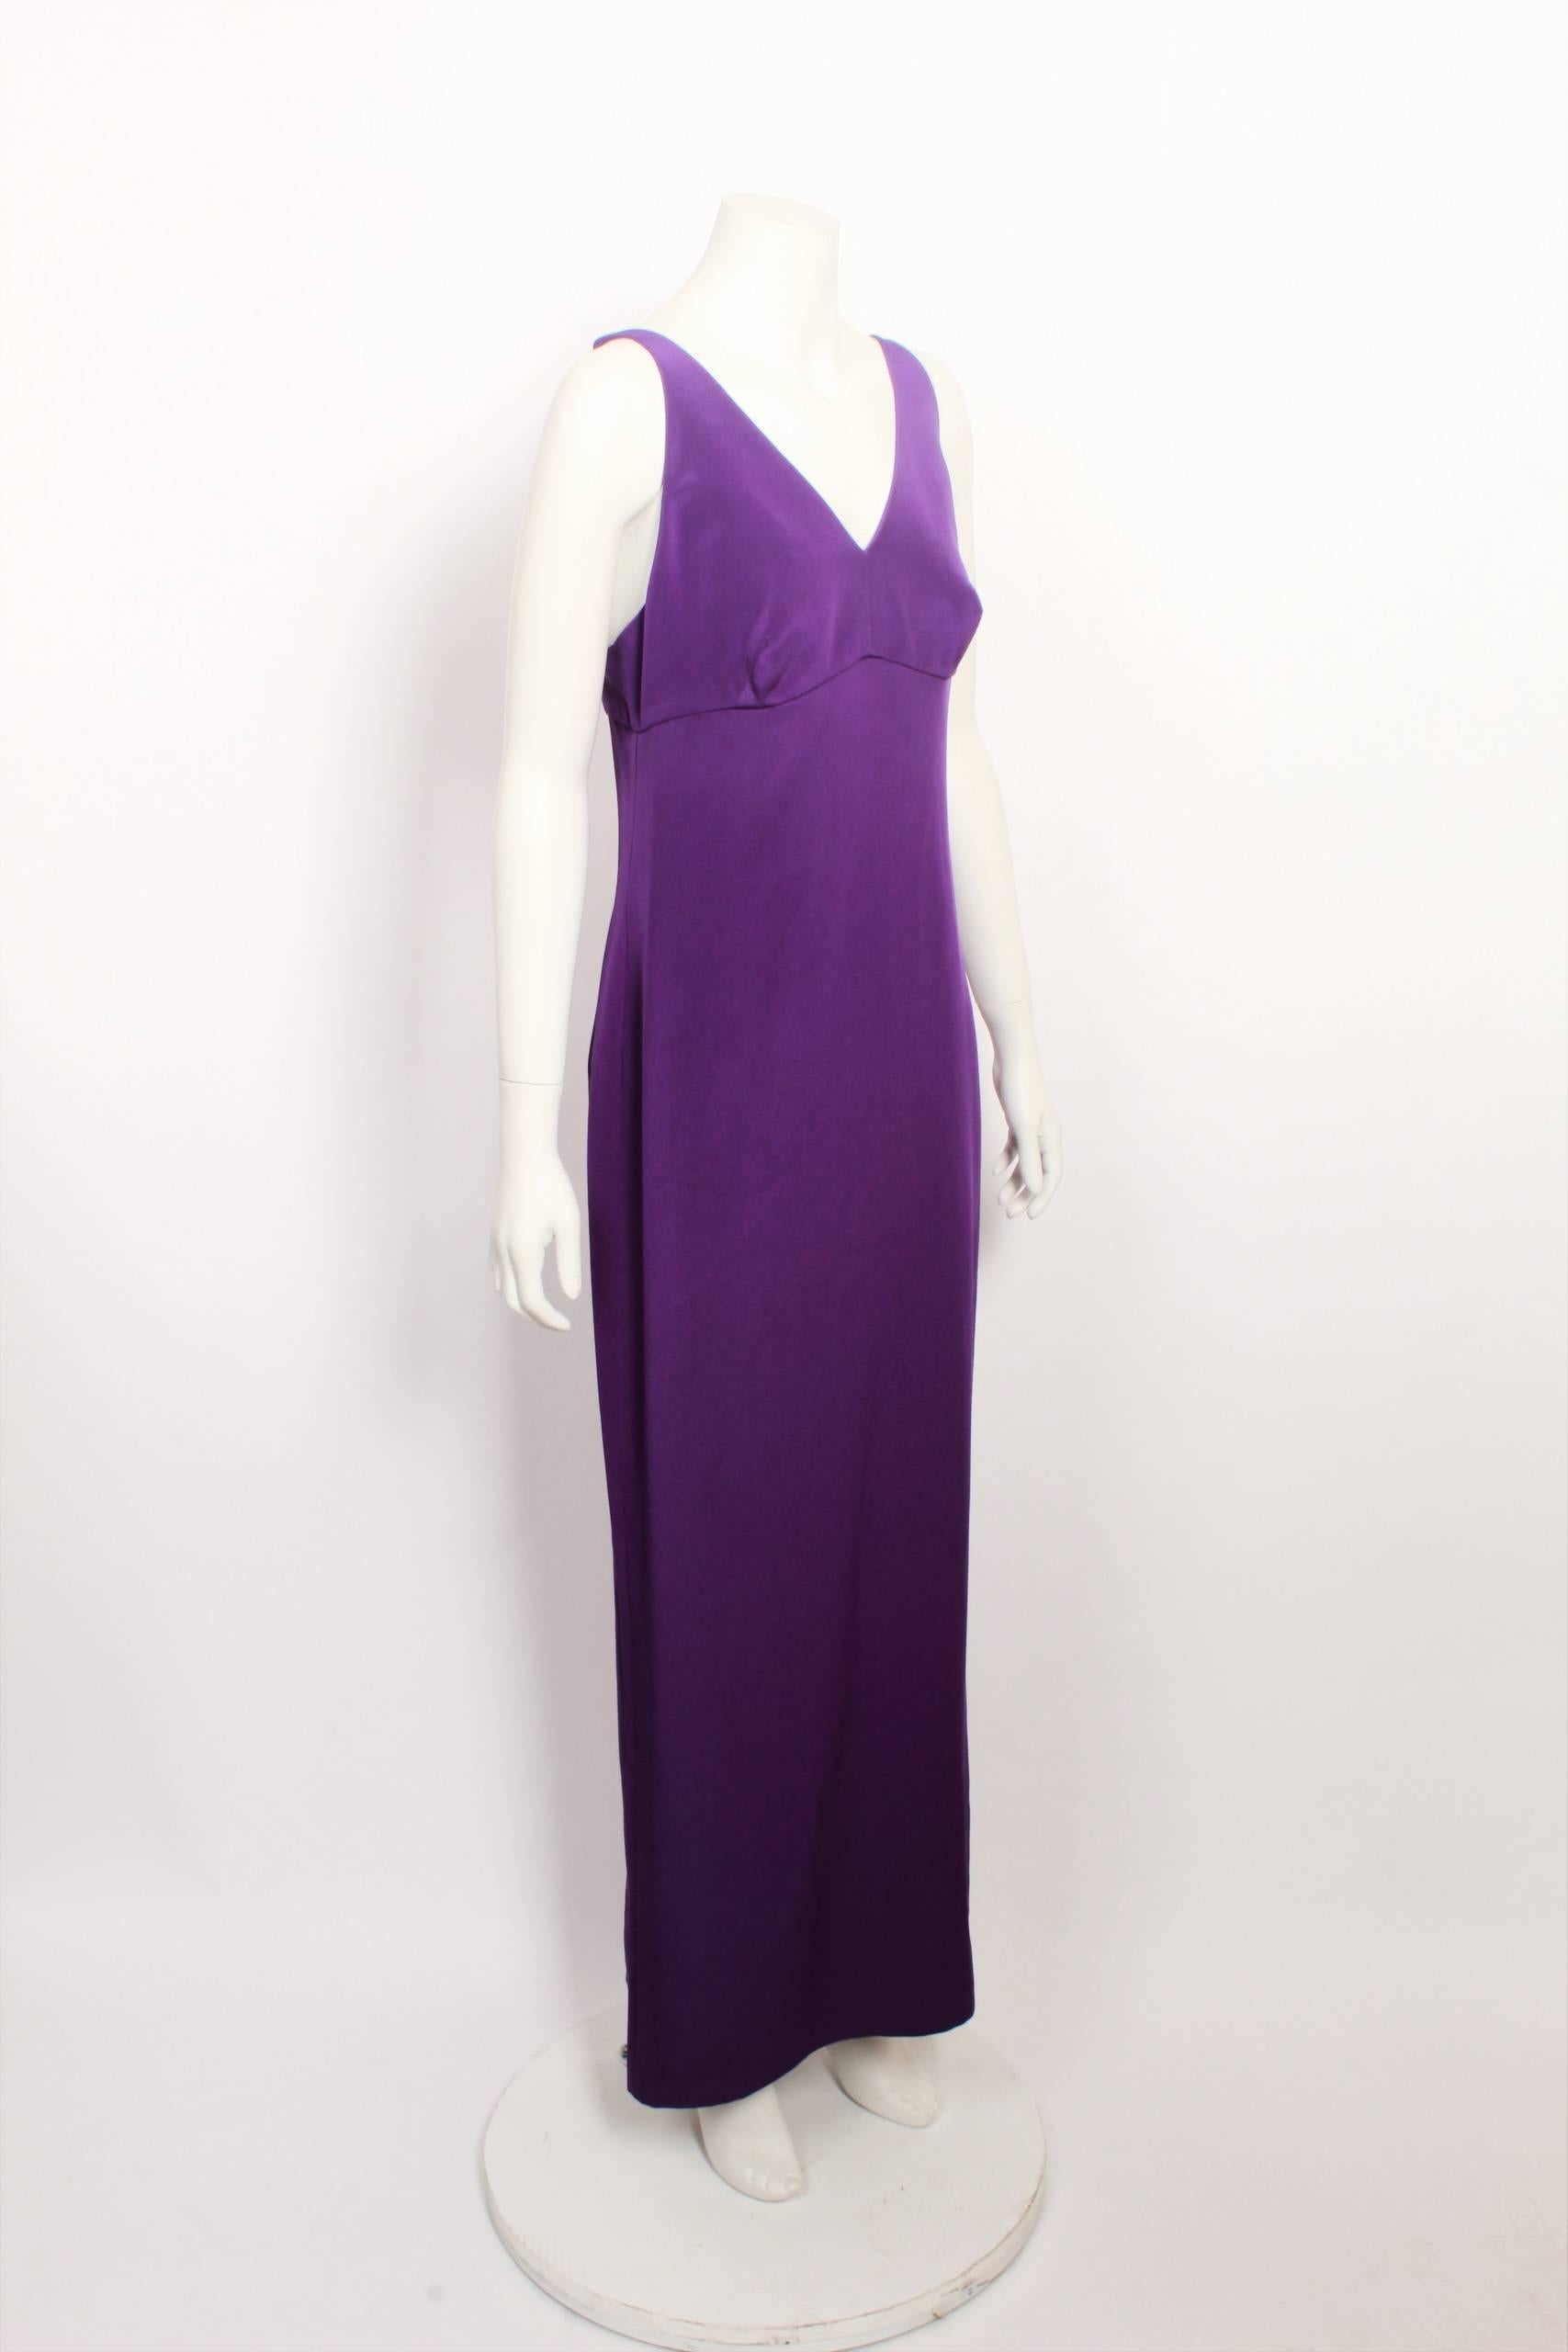 Classic Dolce & Gabbana amethyst purple  100% silk slip dress with adjustable black underwear style straps. Back invisible zip closure and hook and eye fastening. 43cm back hem split. Unlined.
Made in Italy. Size 44 .
